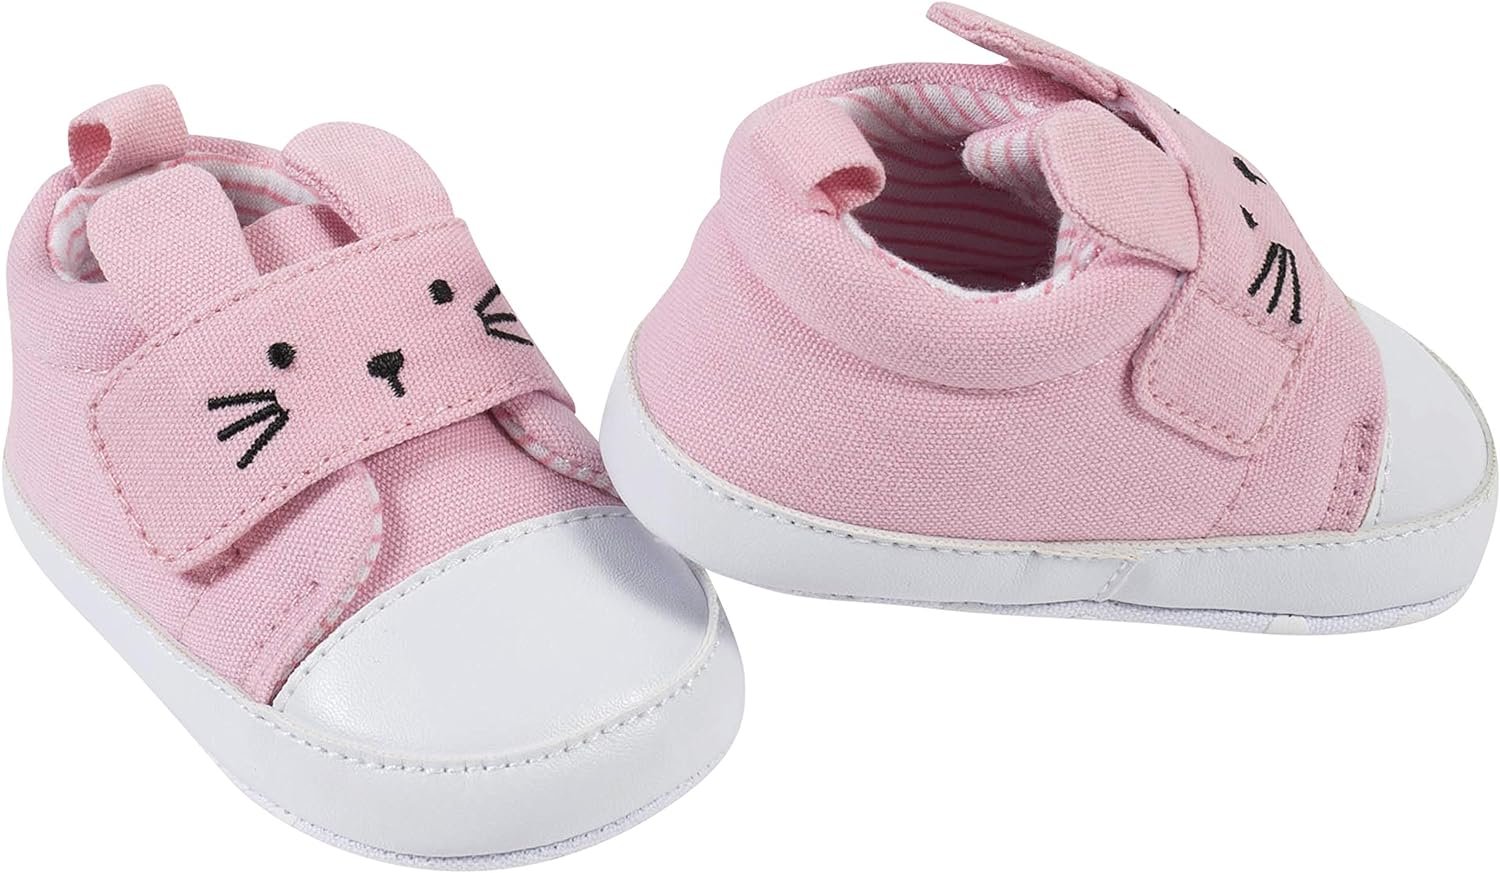 Gerber Unisex Baby Sneakers Crib Shoes Newborn Infant Toddler Neutral Boy Girl Bunny Pink 6-9 Months